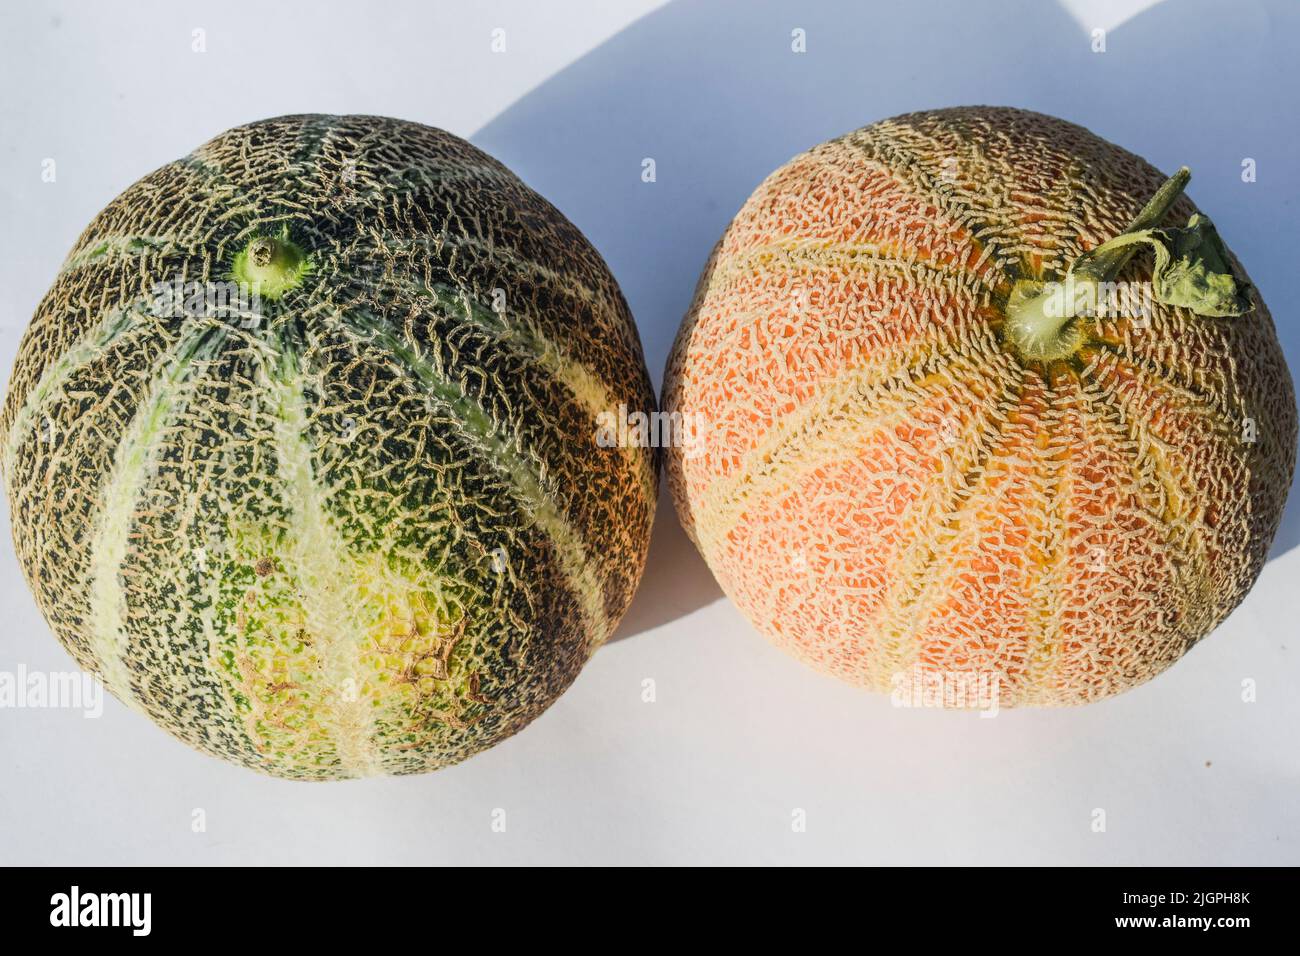 Side view of green and yellow color striped Musk melon or Cantaloupe also known as Kharbuja fruit. Indian fruit Muskmelon with gride lines on outdoor Stock Photo